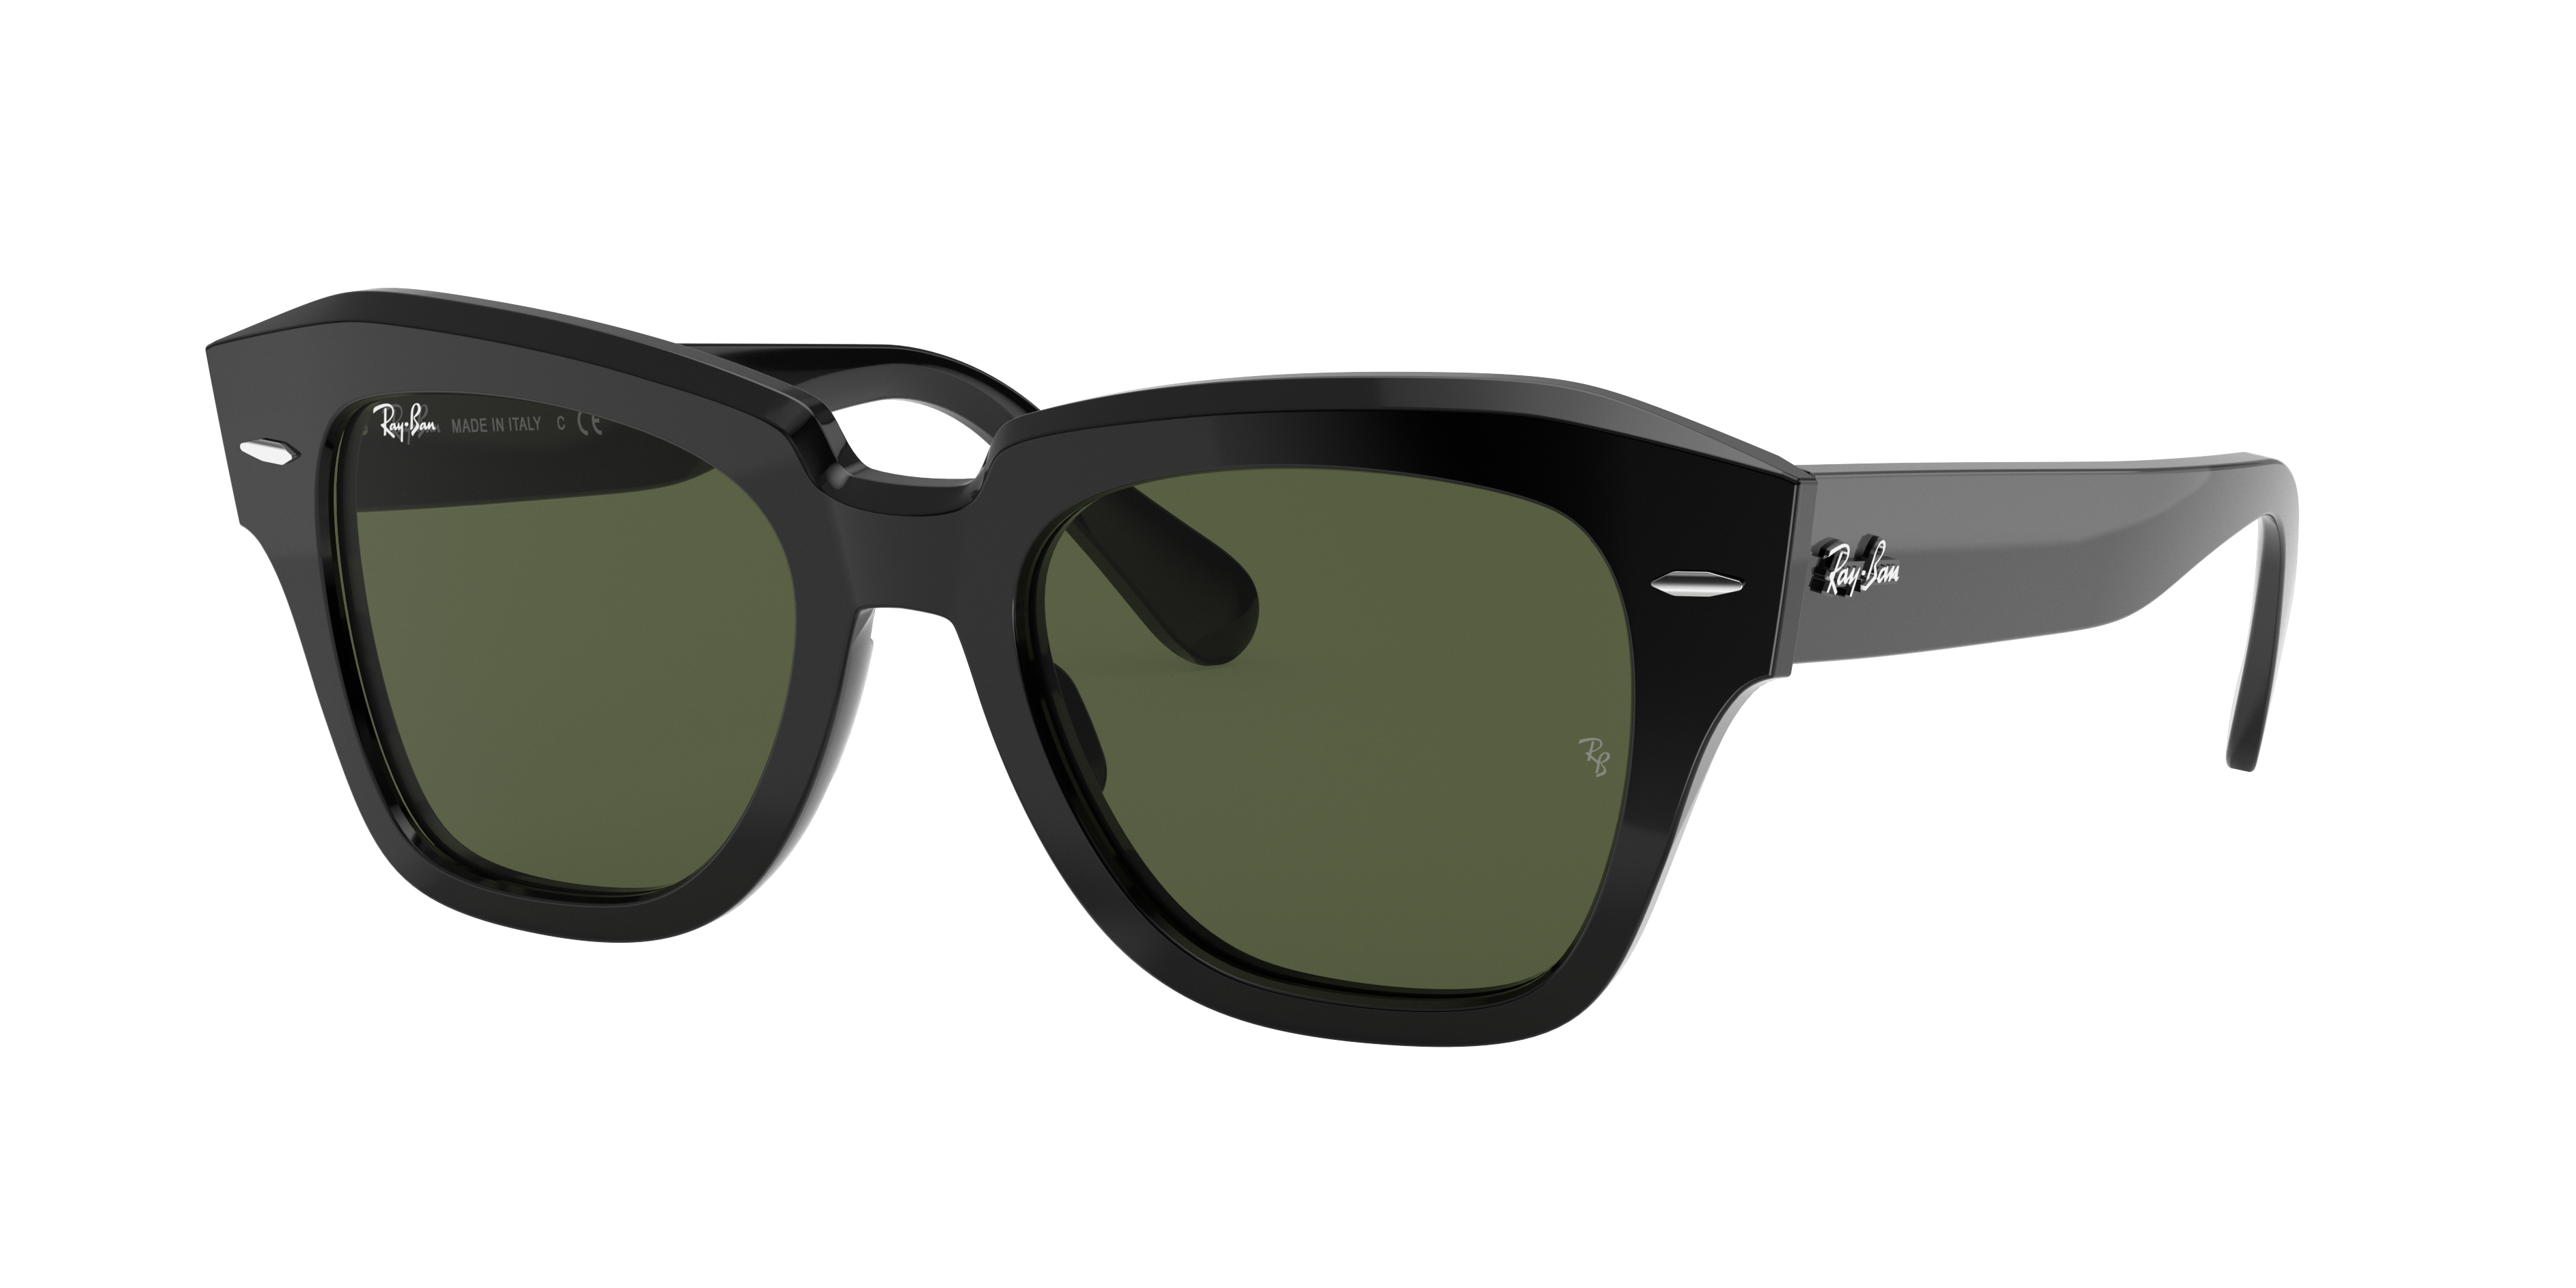 Check out the State Street at ray-ban.com